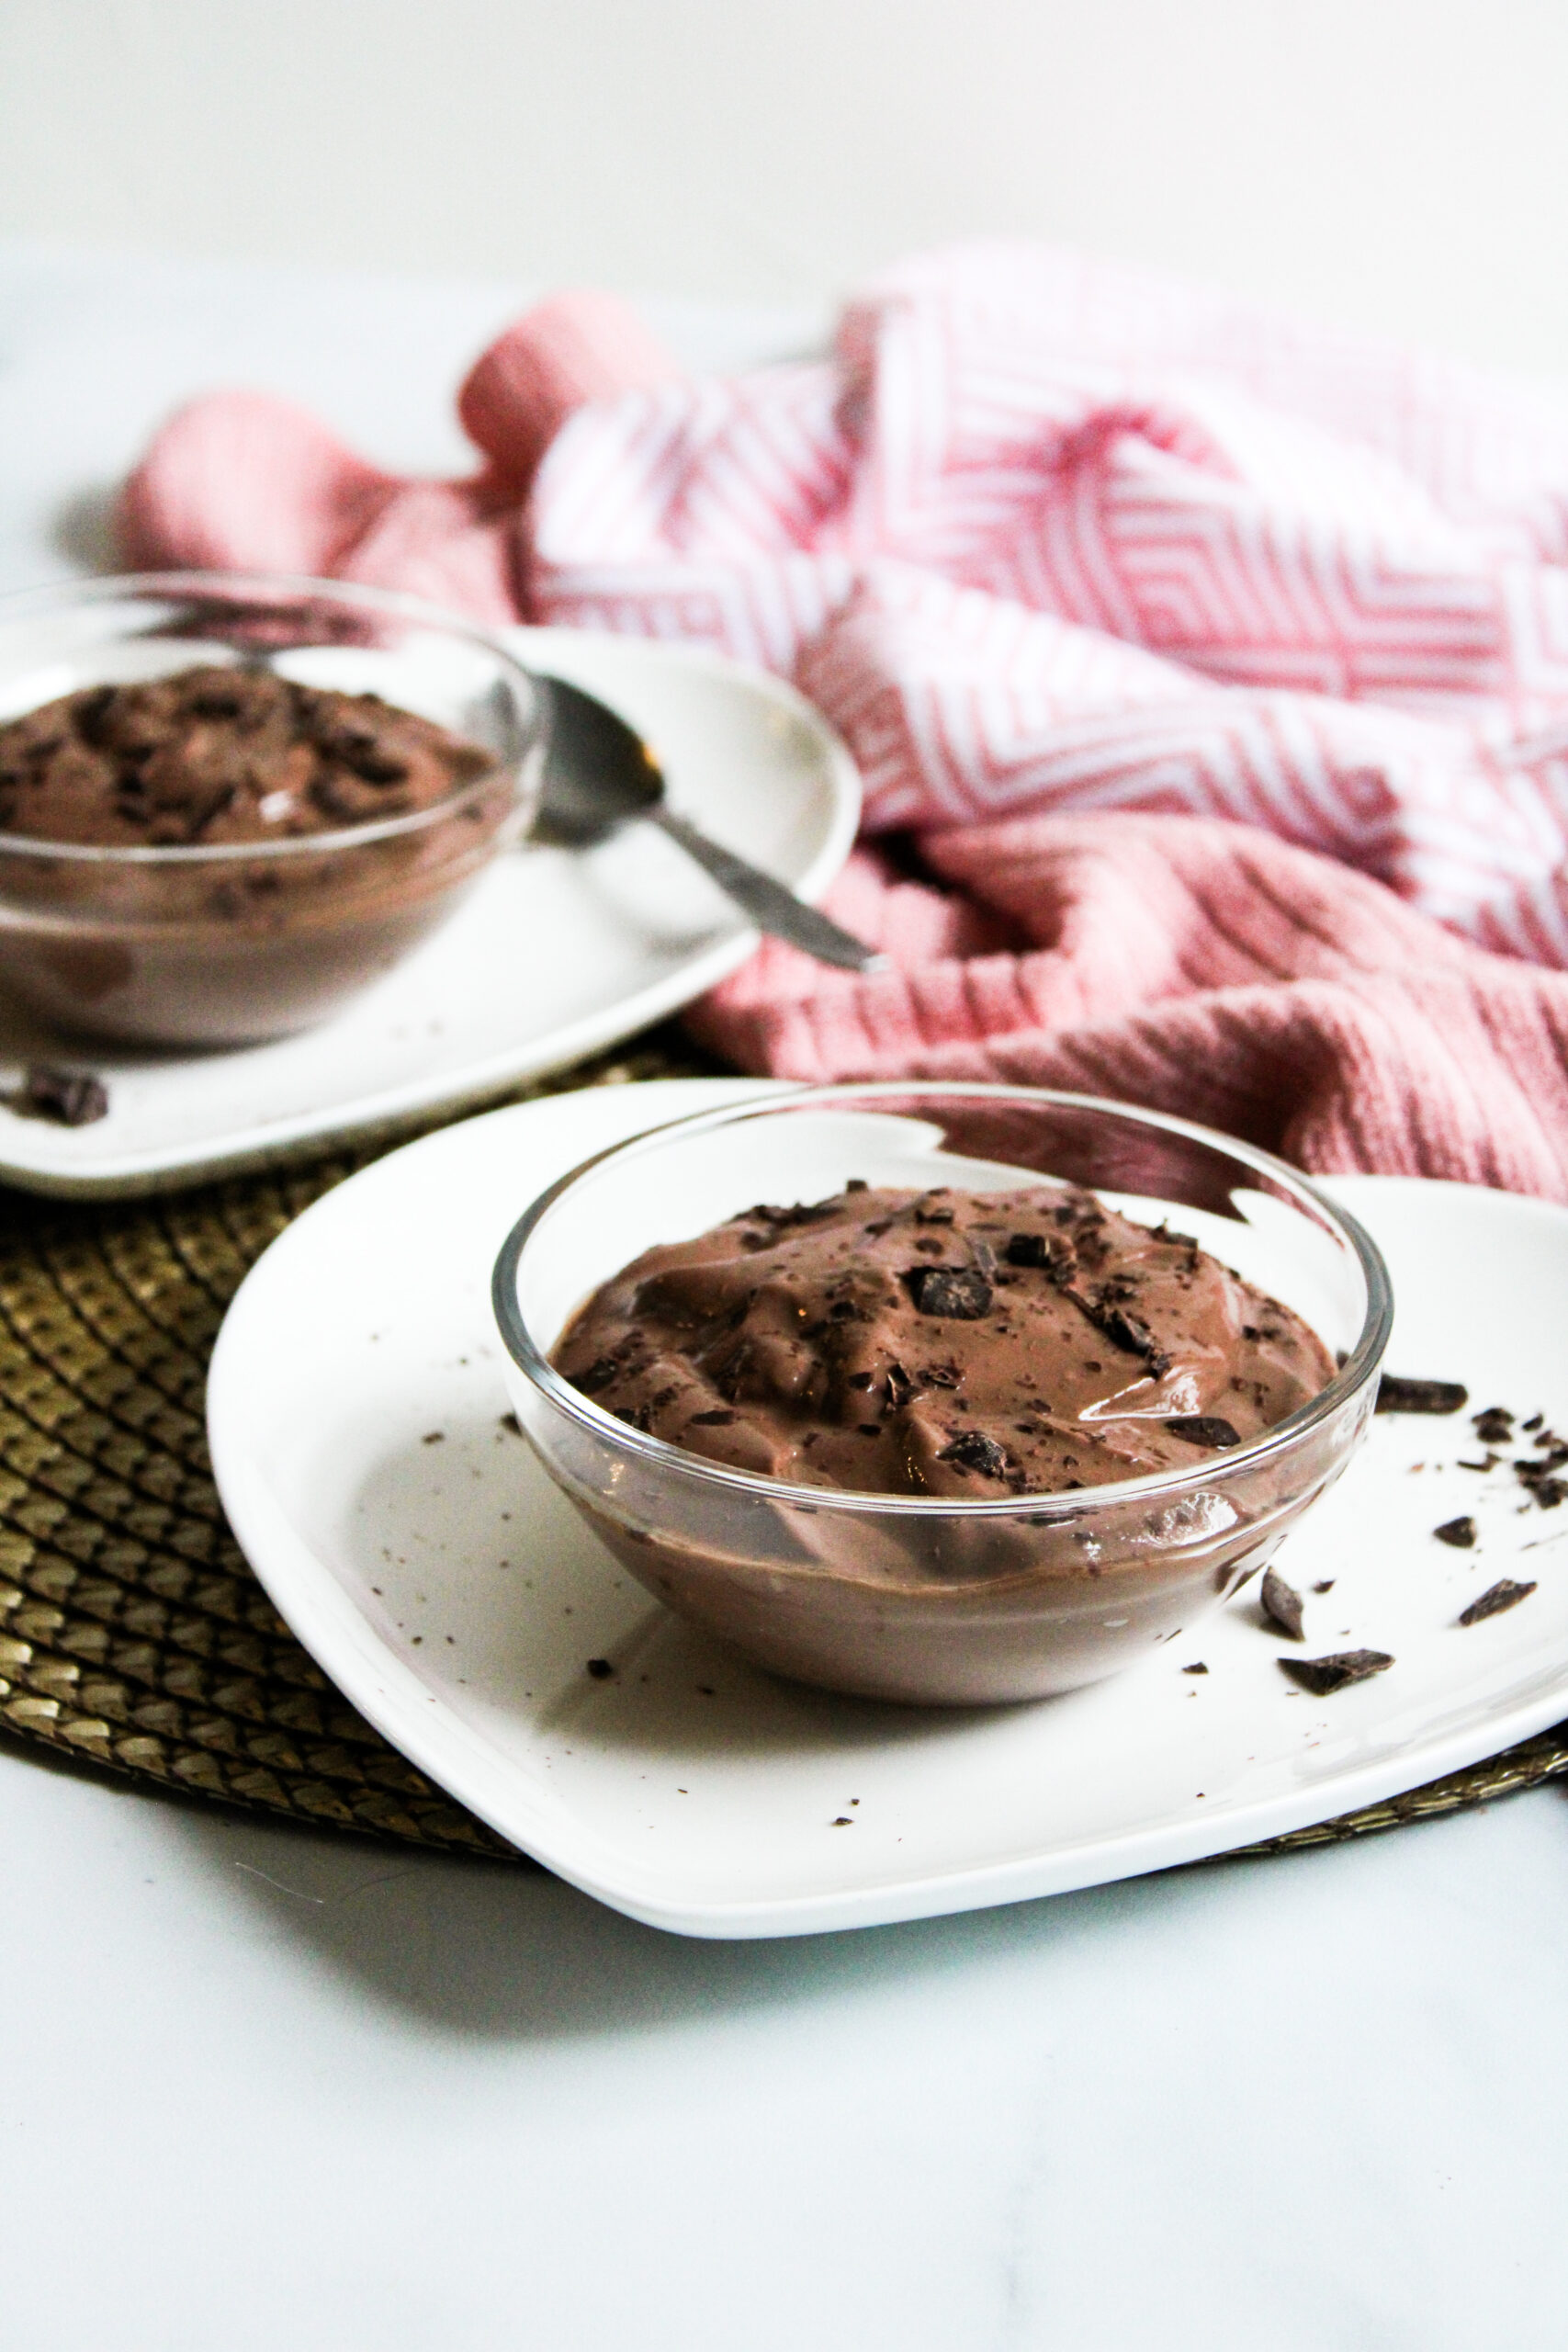 side profile of chocolate mousse in small glass bowls on top of white heart-shaped plates with a pink towel in the background